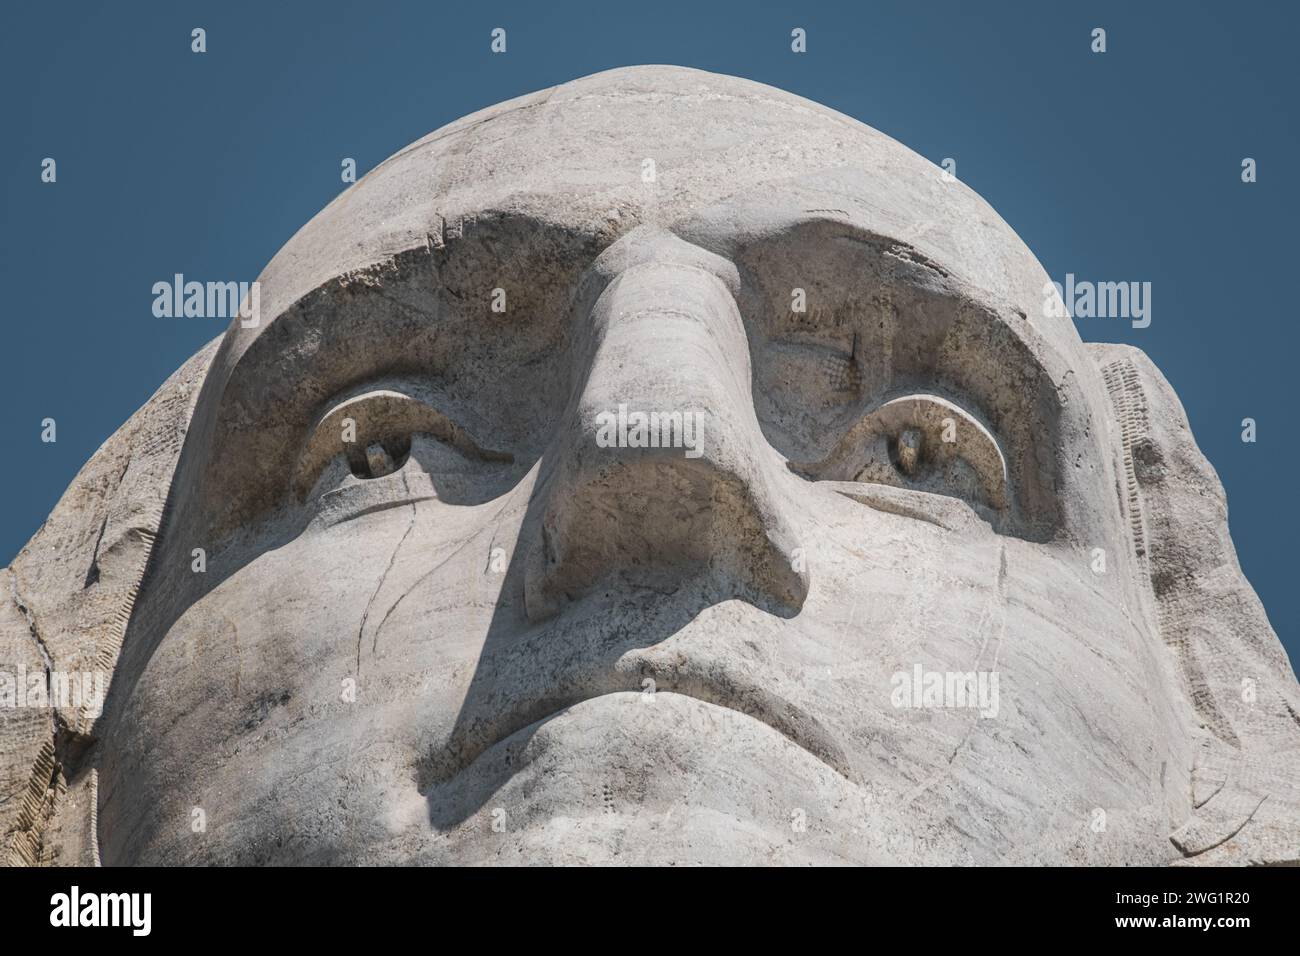 Close-up view of George Washington carved into the mountainside at Mt. Rushmore Stock Photo